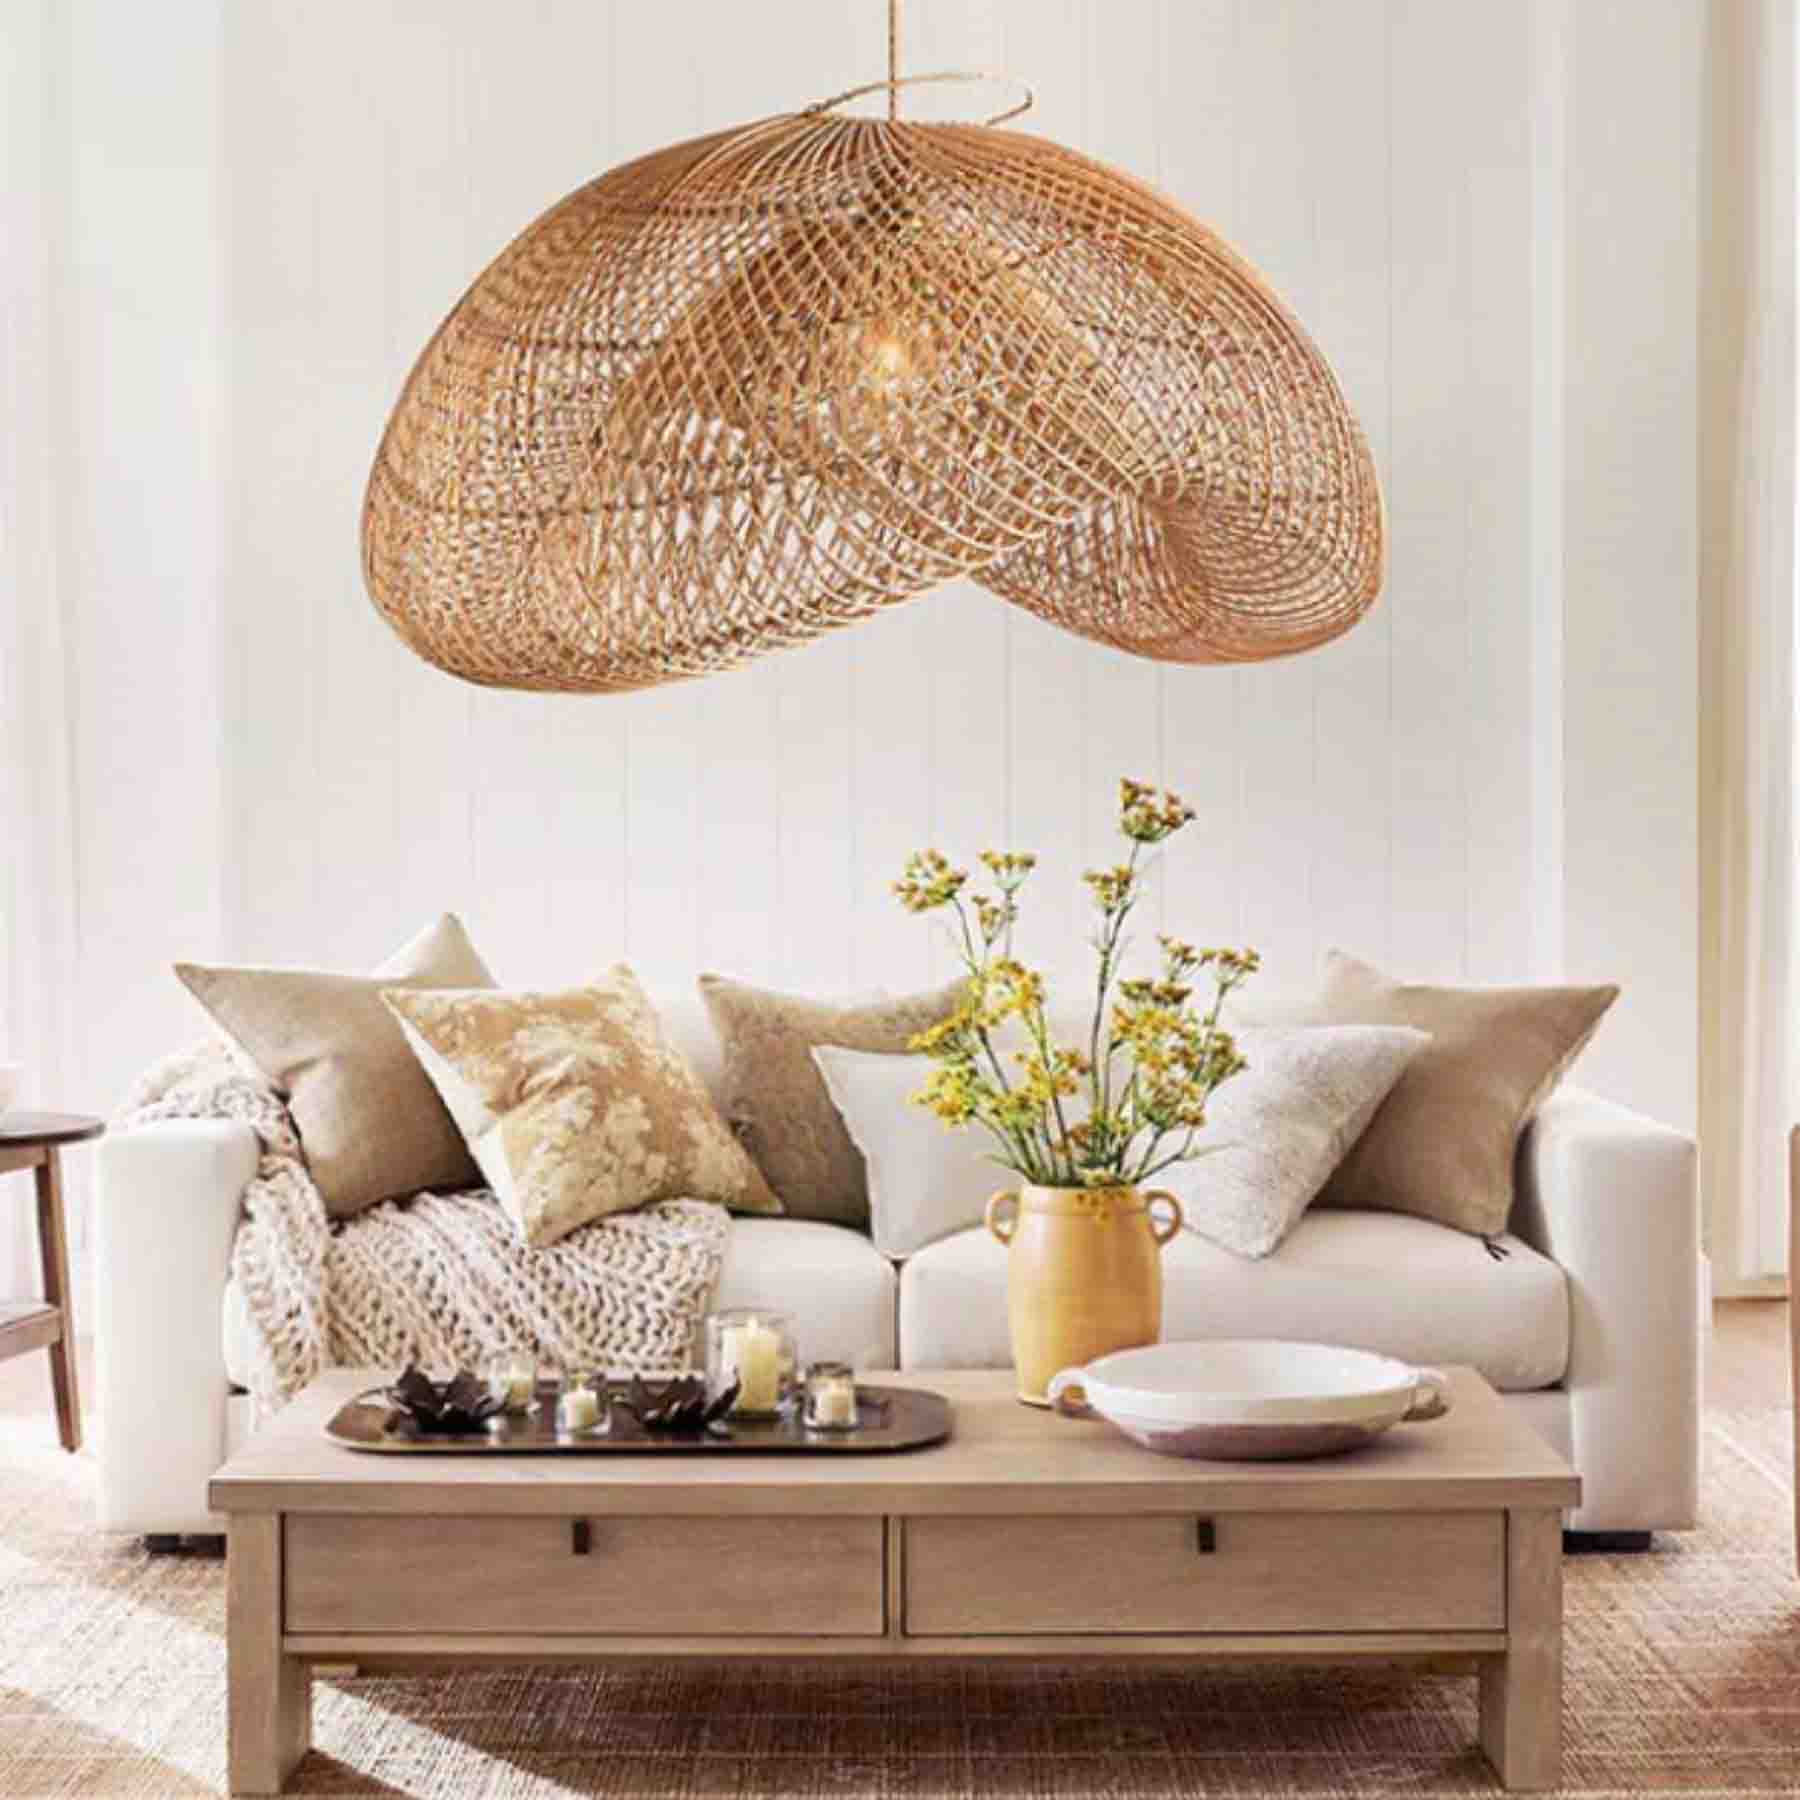 this pendant light is a true masterpiece resembling the artistry found in nature